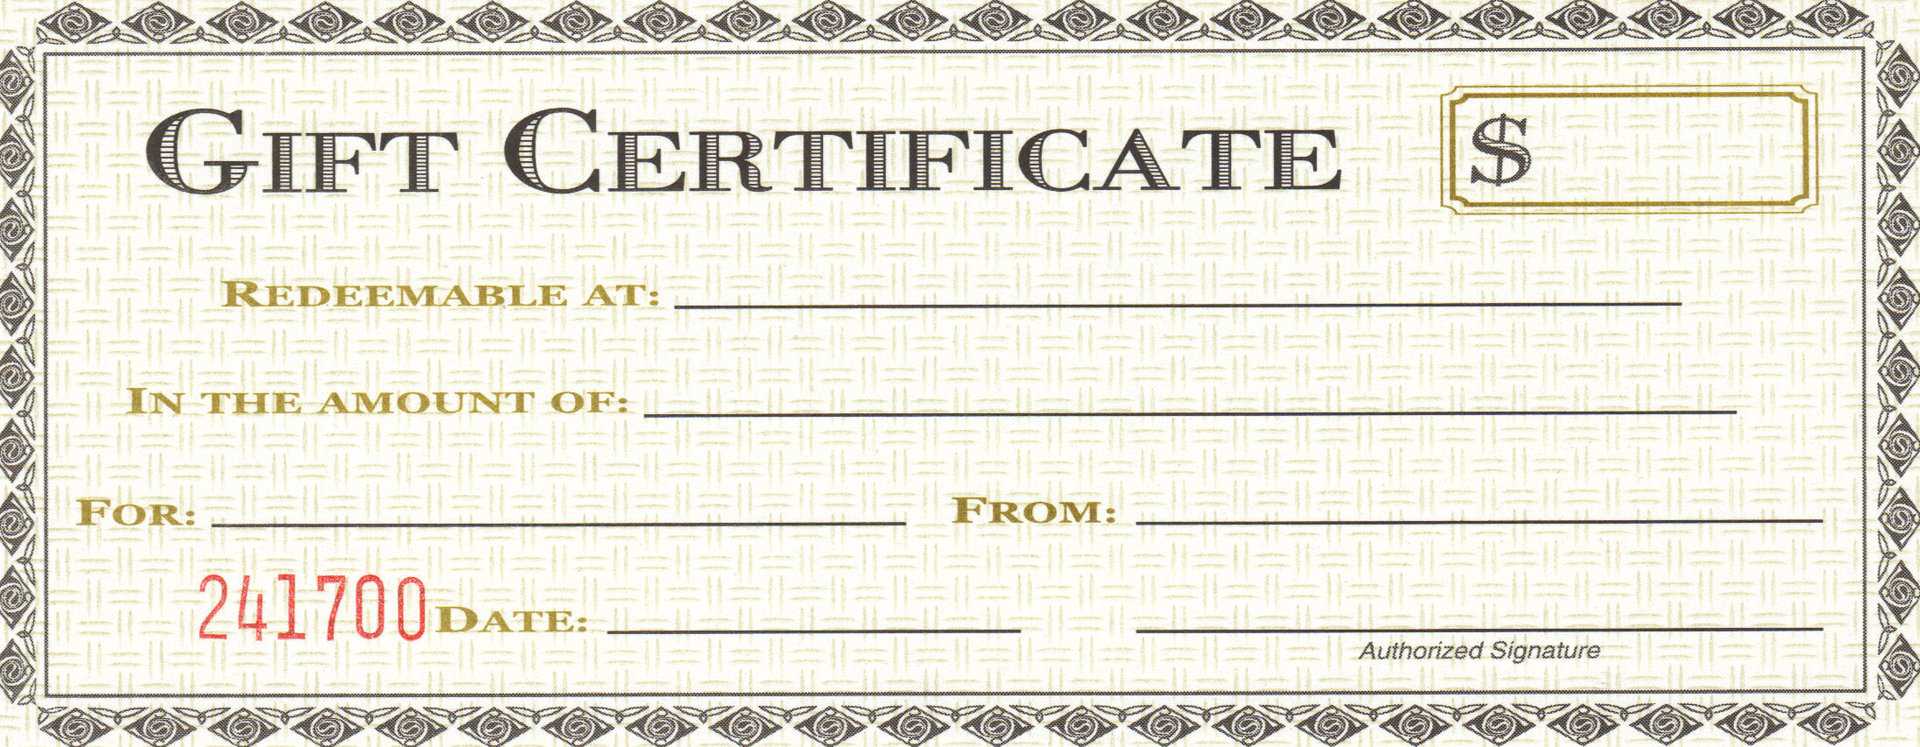 Free Gift Vouchers Templates. Printable Gift Certificate For Printable Gift Certificates Templates Free